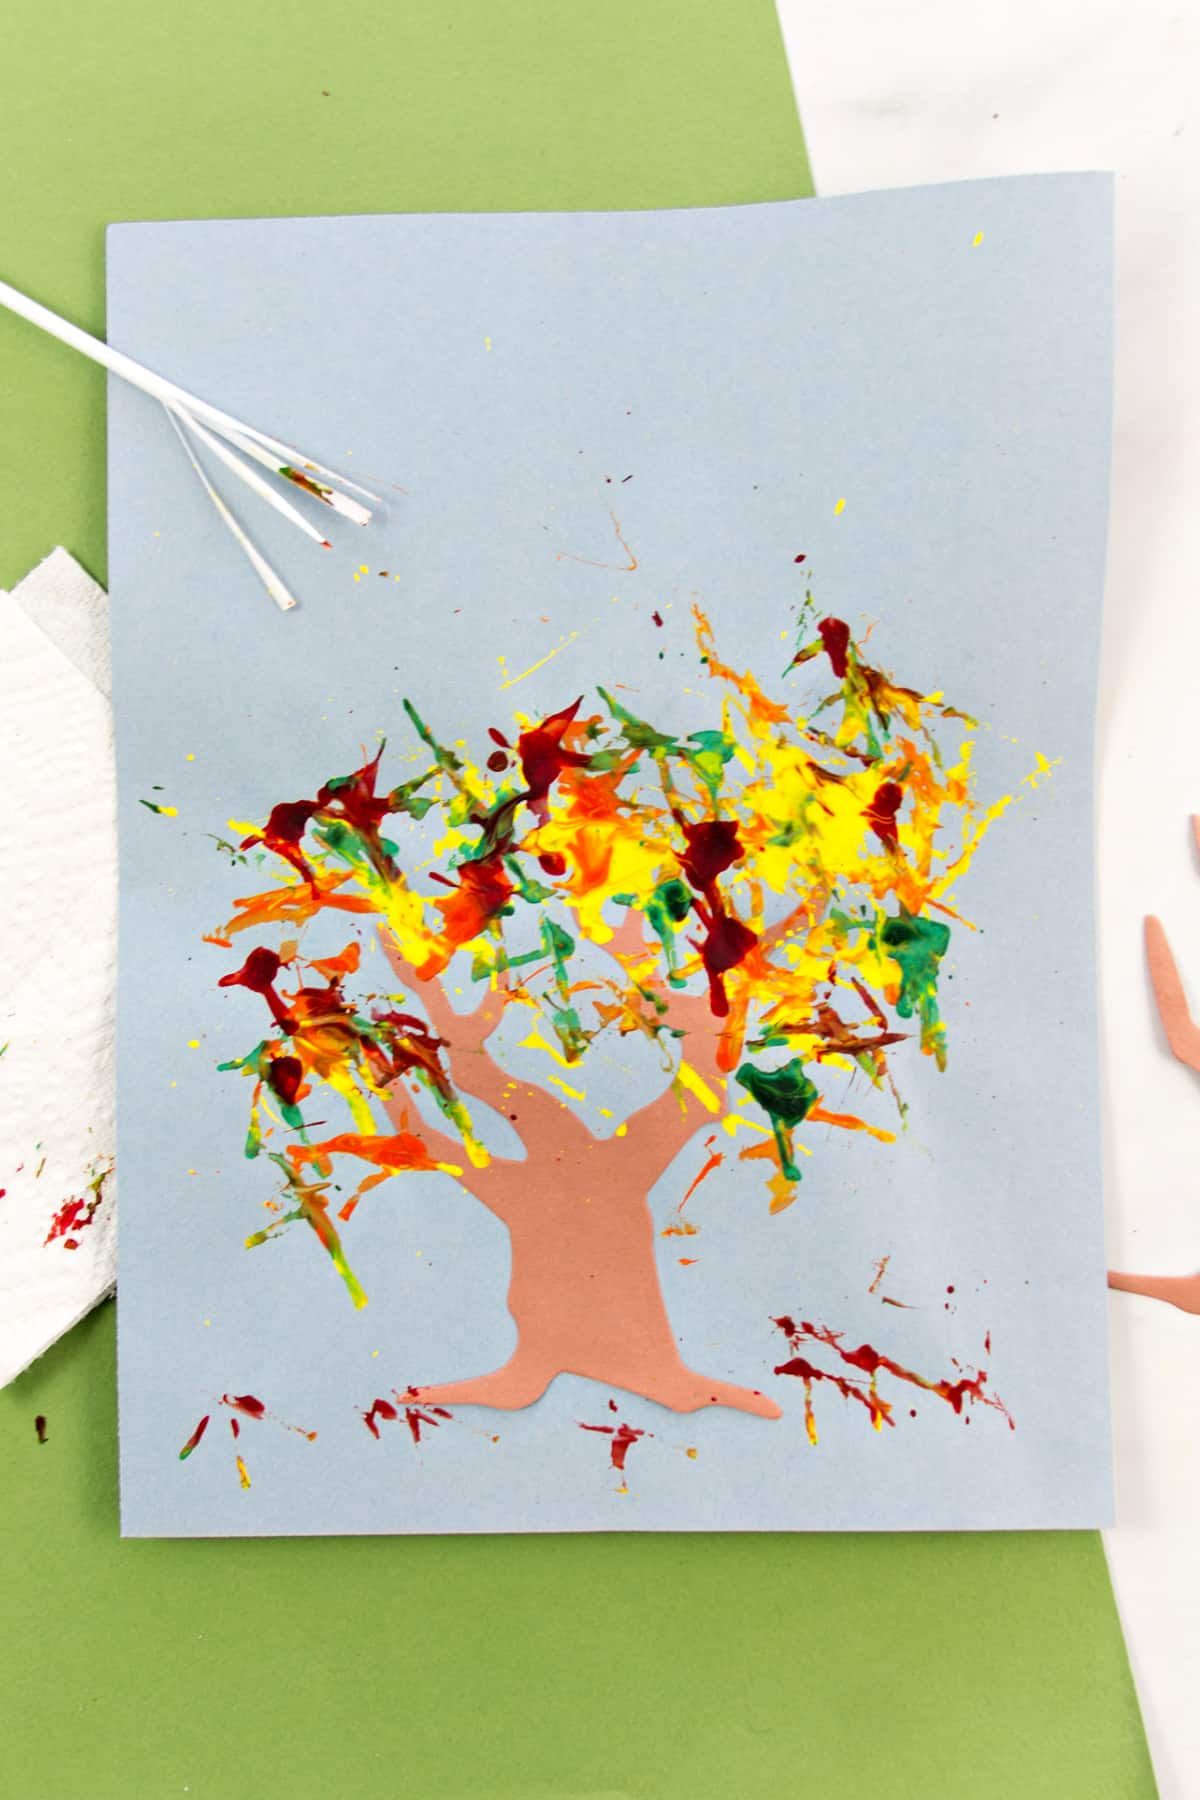 A paper tree with fall leaves painted used a plastic straw